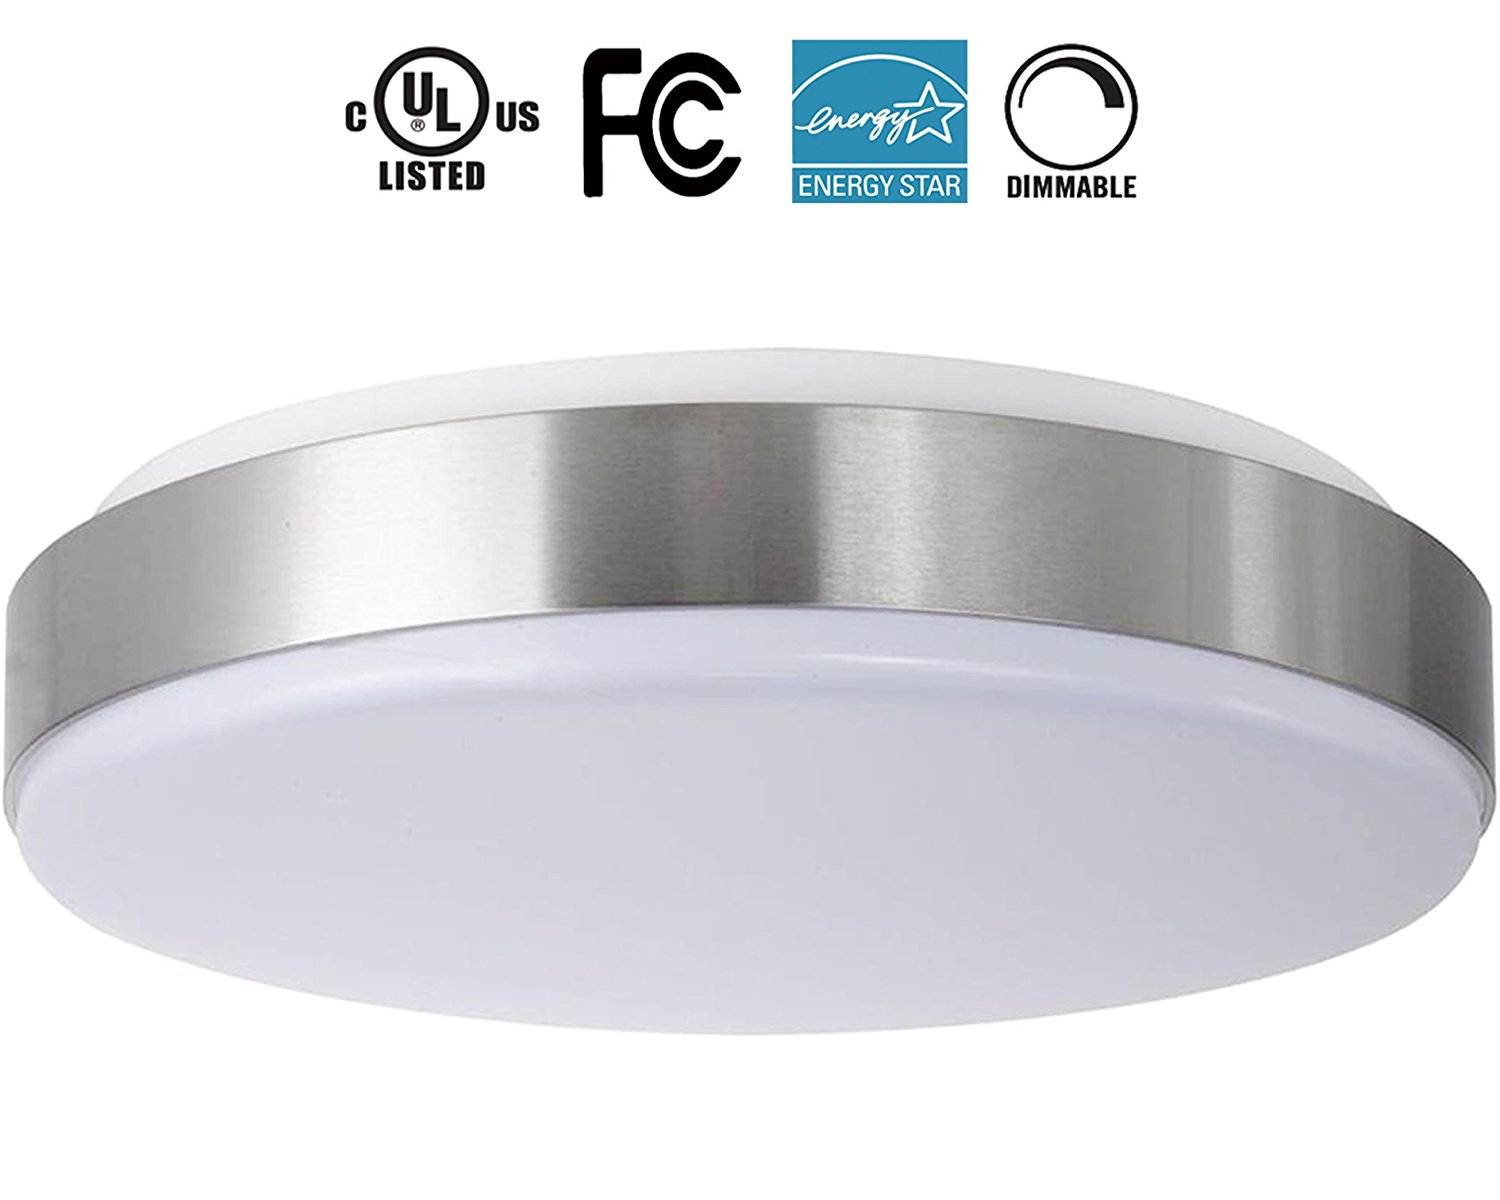 22W 15-Inch Natural light White Dimmable LED Ceiling Lights, 200W Incandescent (50-100W Fluorescent) Bulb Equivalent, 4000K, Ceiling Light Fixture, Ceiling Lighting, Flush Mount Light 4000K.